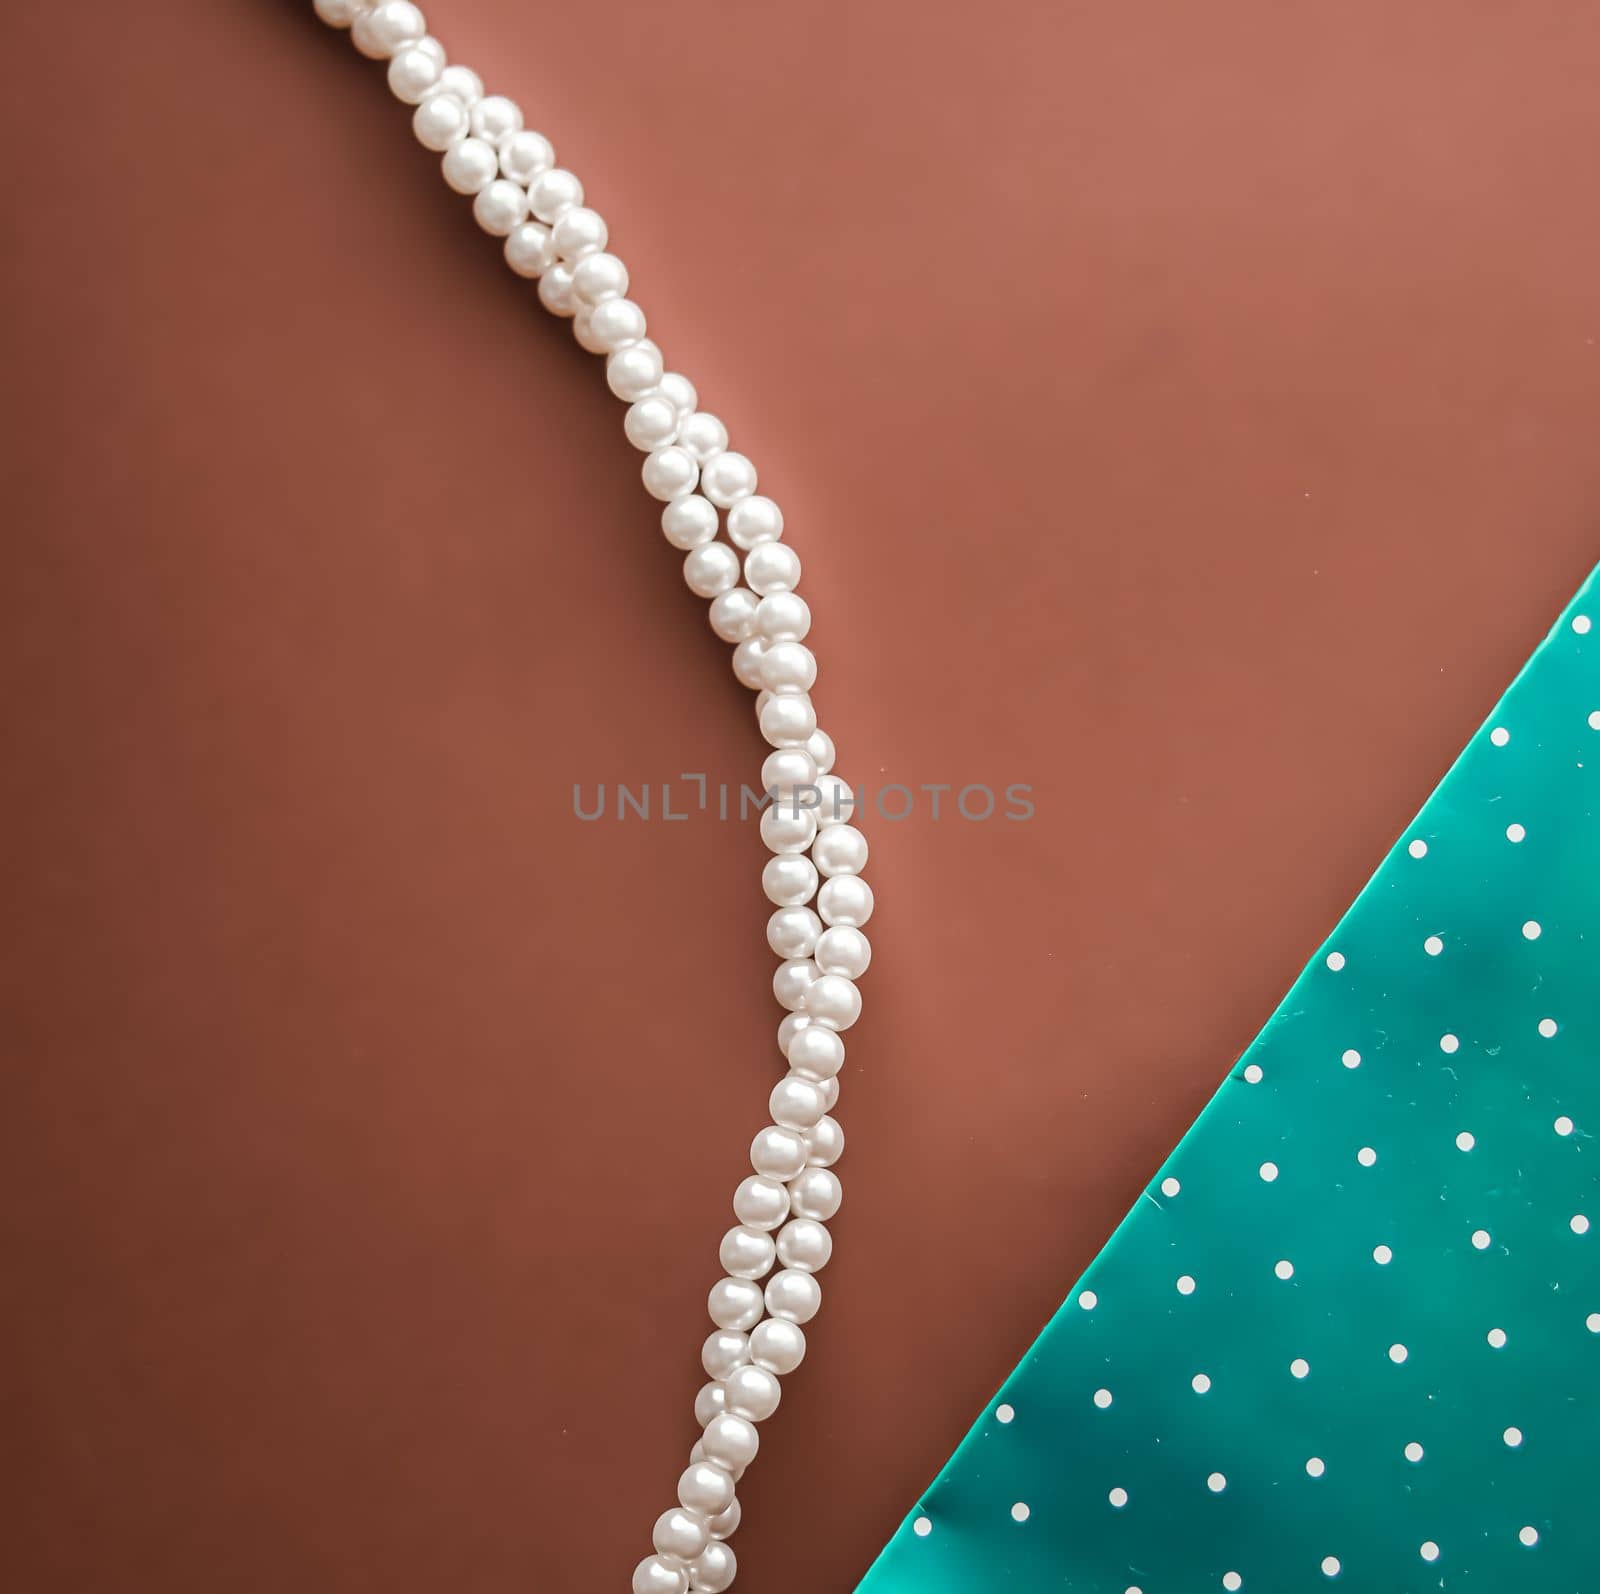 Pearl jewellery necklace and abstract green polka dot background on brown backdrop by Anneleven